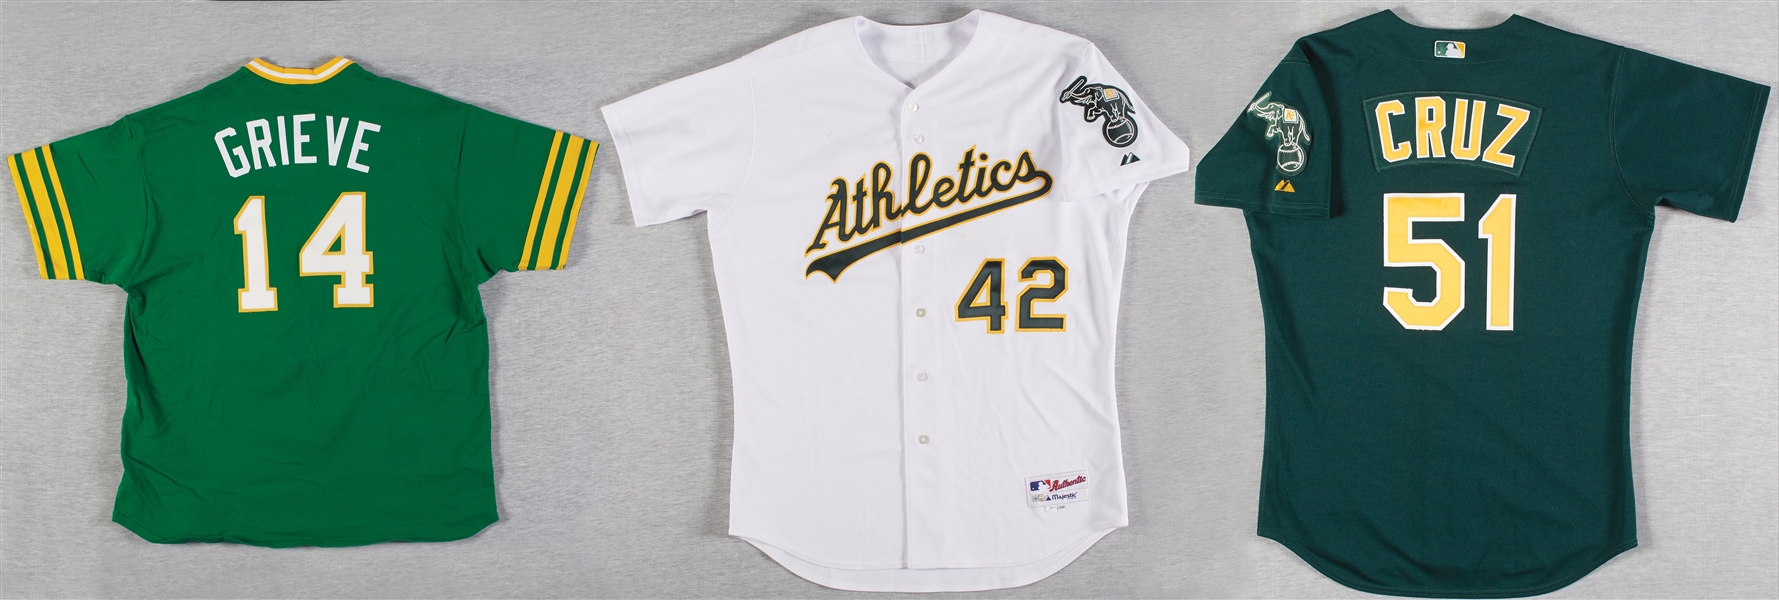 Oakland A's Game-Used Jerseys Group with Grieve, Cruz, Gallego (3)